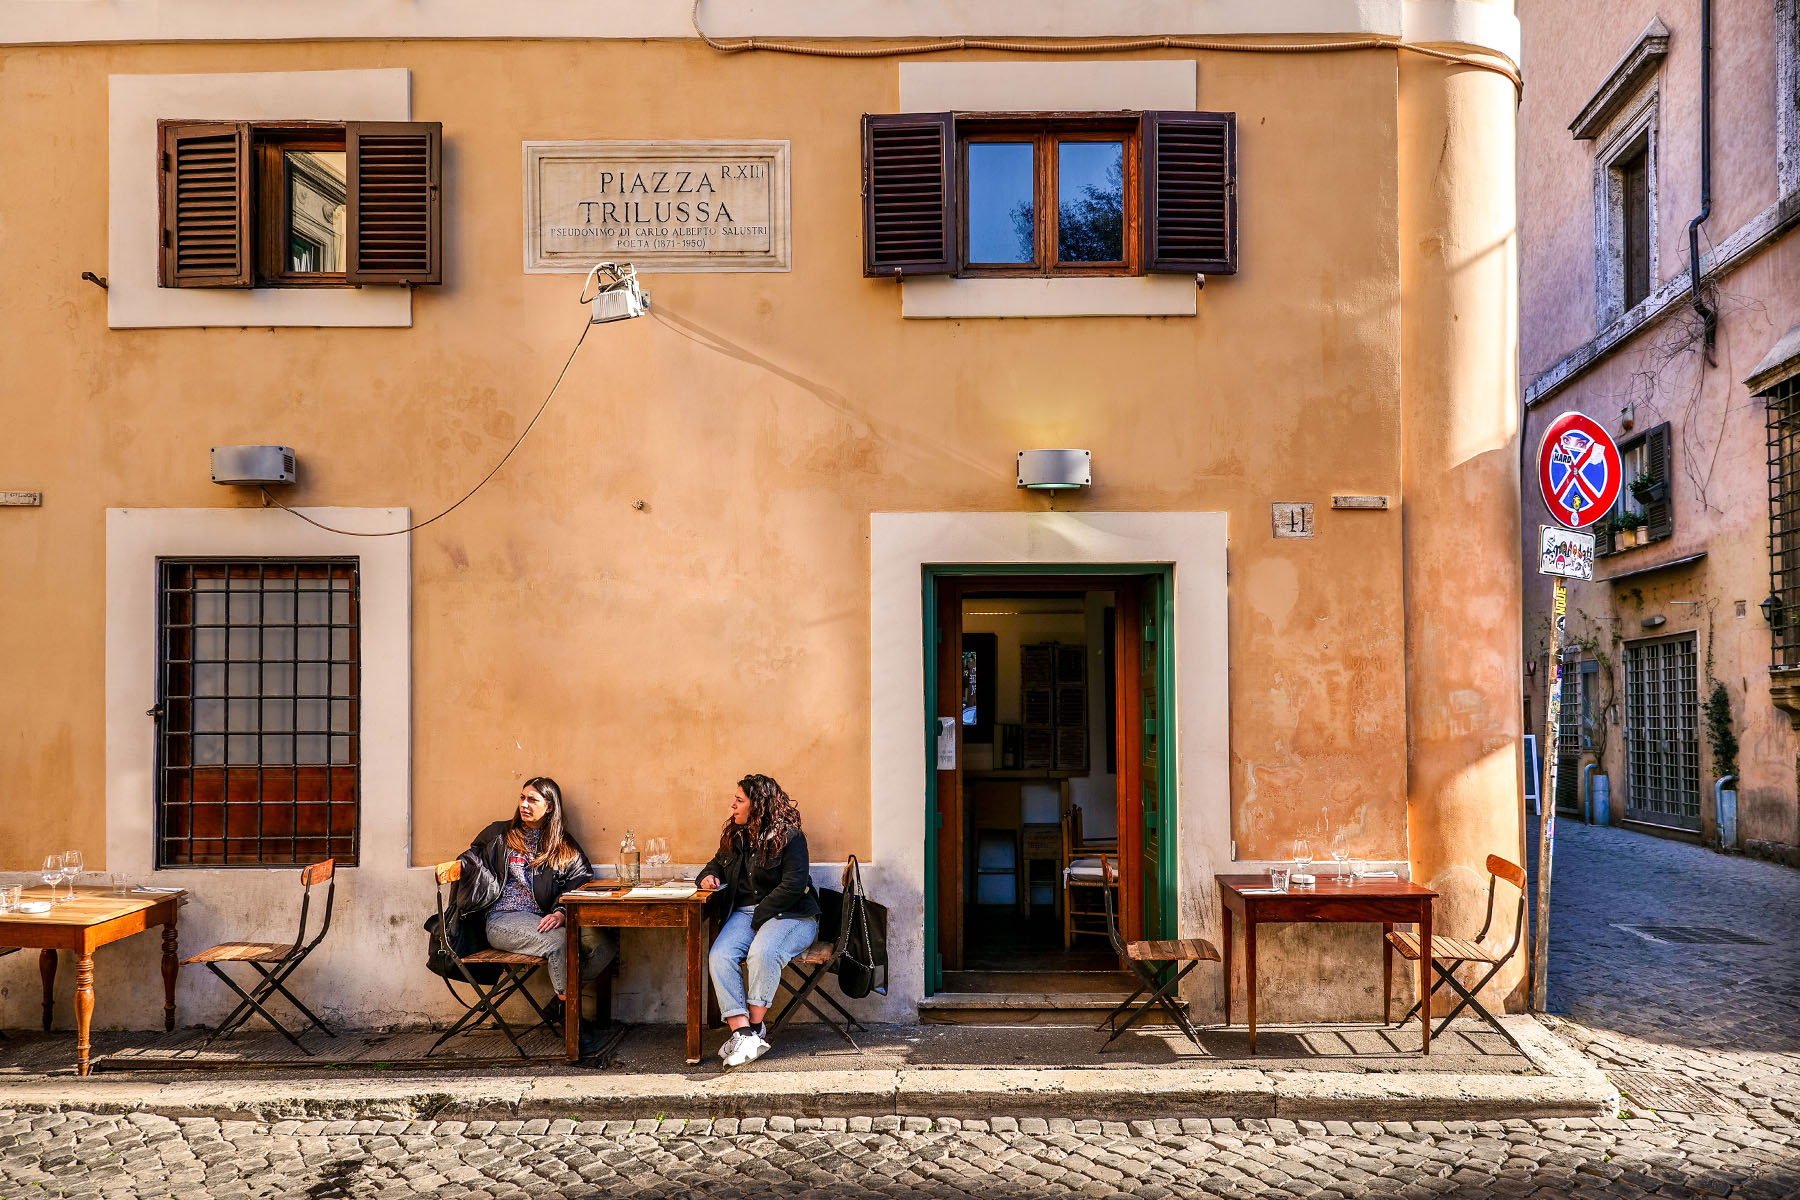 Two women sitting outside a bar in the ancient Trastevere district of Rome.